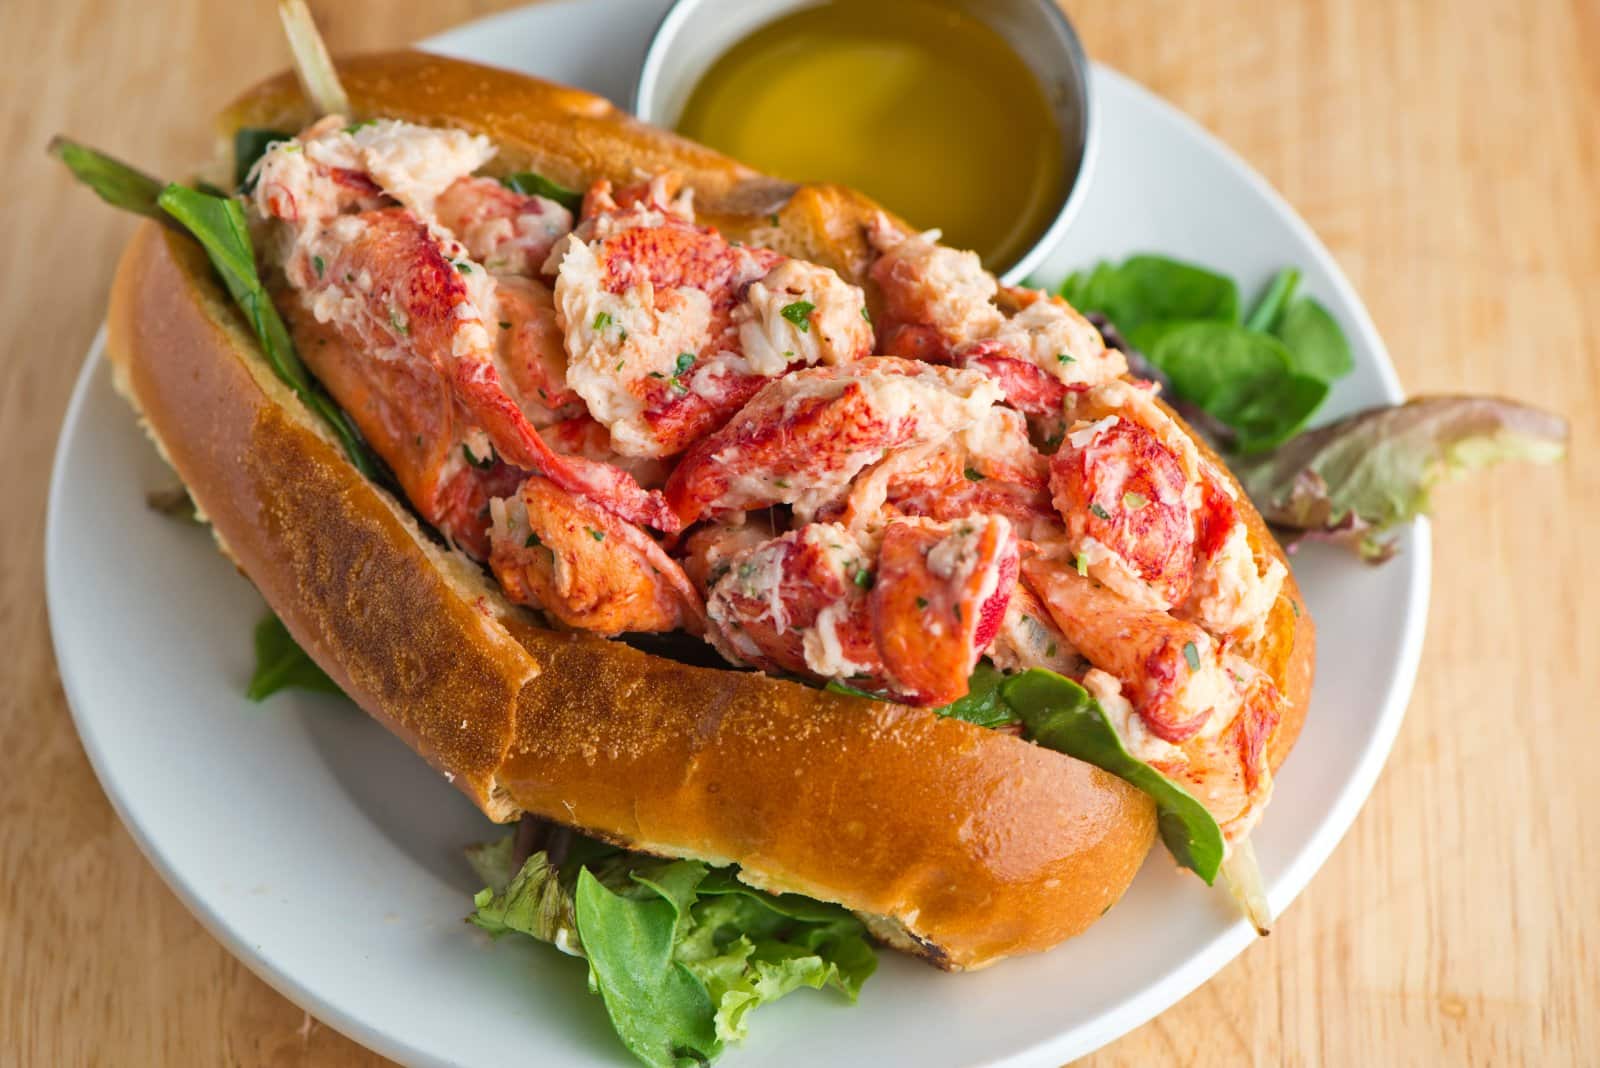 Image Credit: Shutterstock / RFondren Photography <p><span>Fresh, succulent lobster meat dressed in mayo and packed into a buttered, toasted roll – New England’s gift to seafood lovers.</span></p>